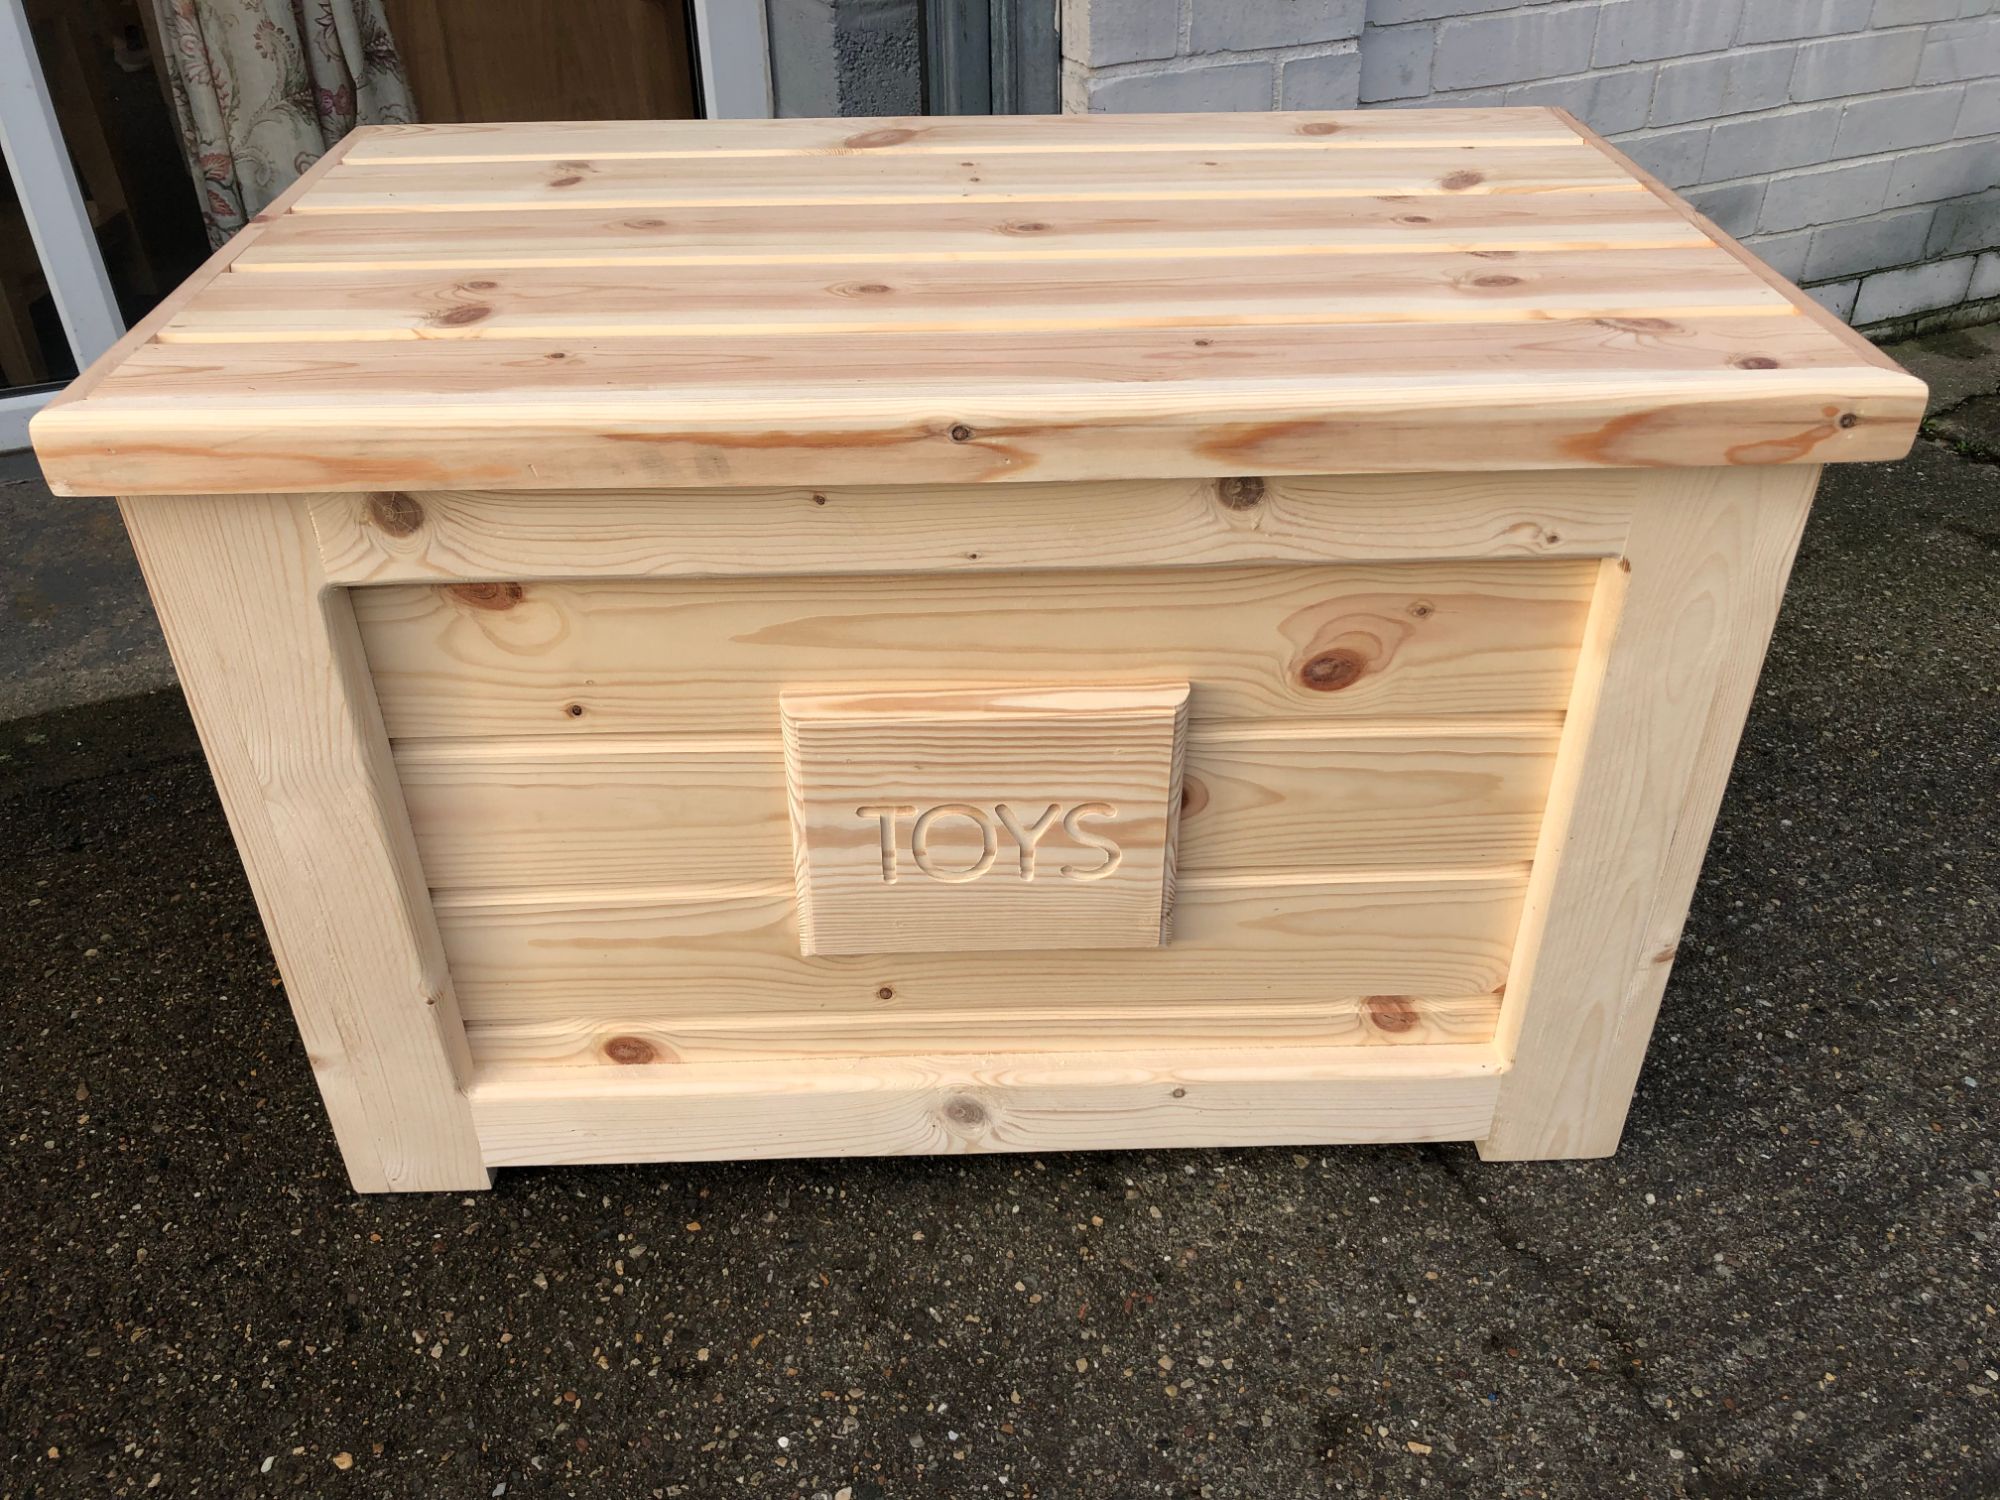 We make the toy boxes to any size